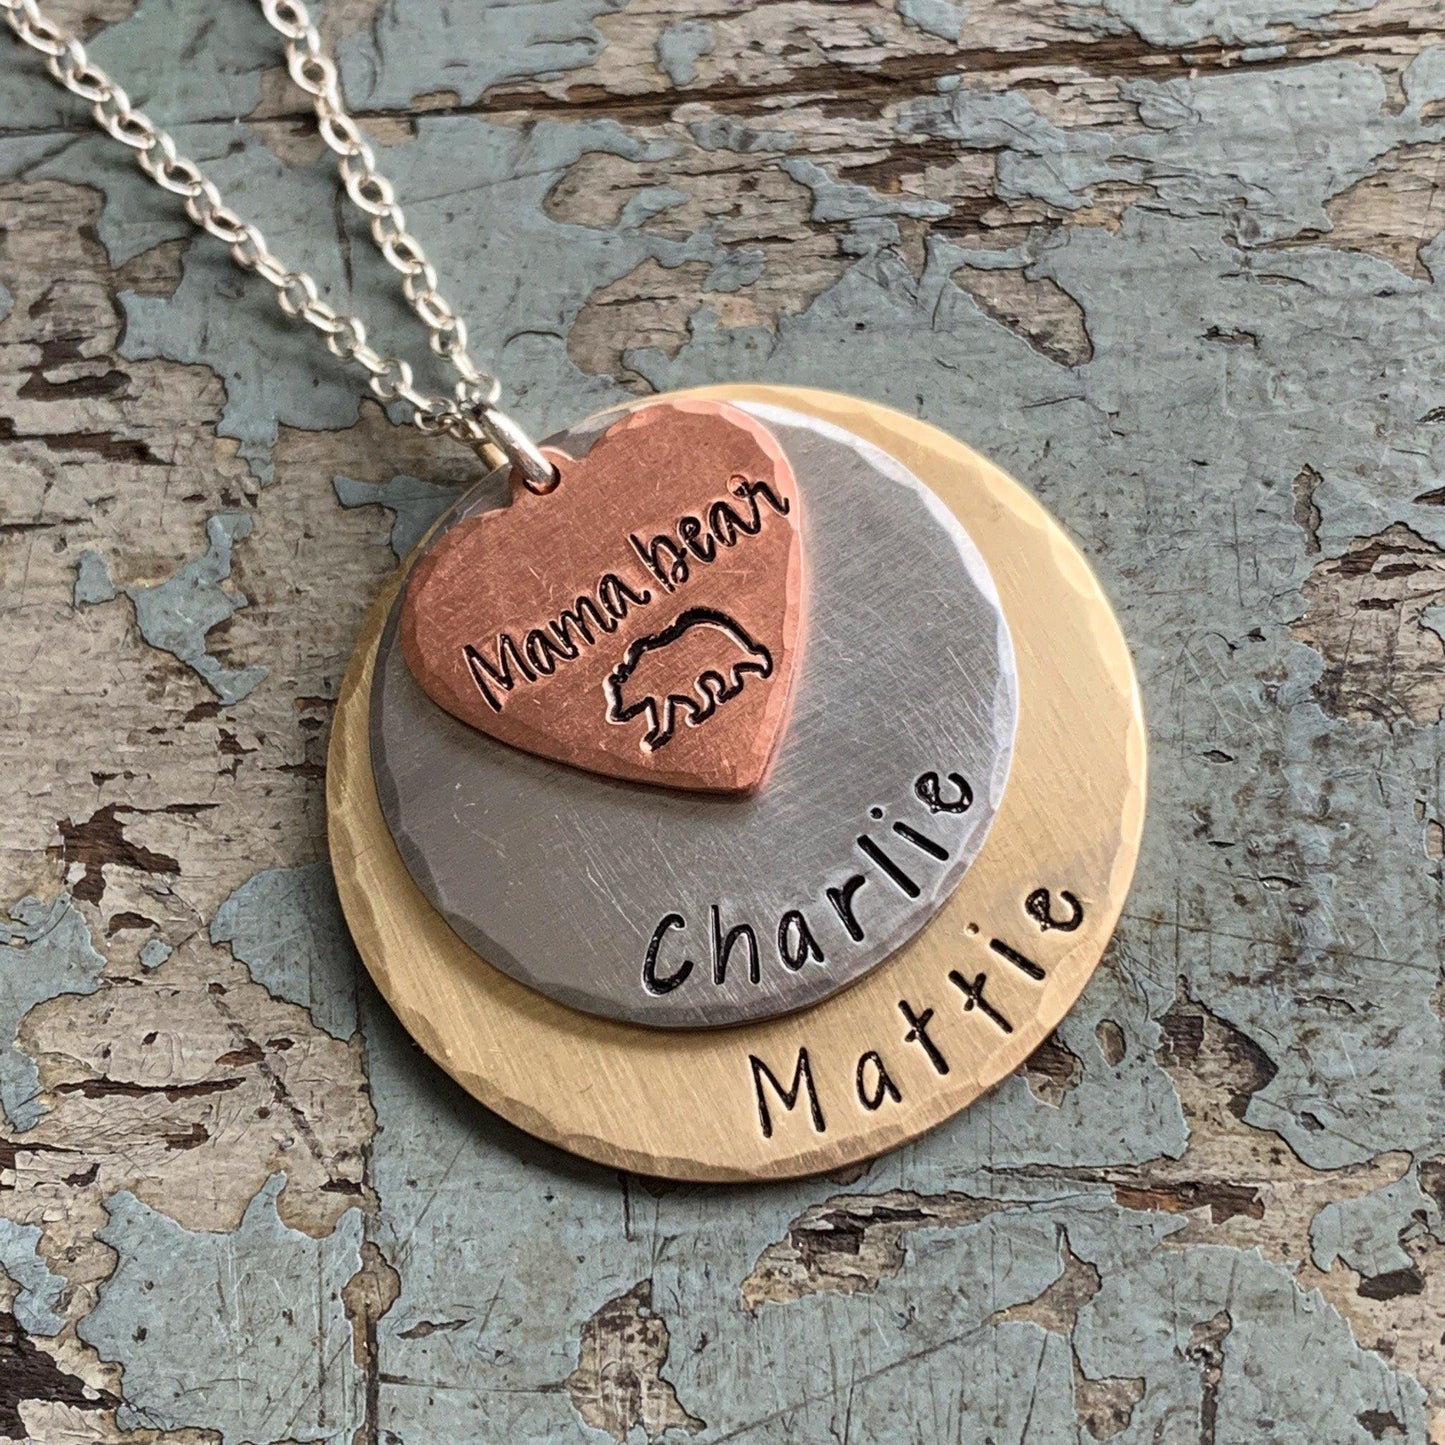 Gifts for Mom - Personalized necklace - Letter to Mom with Heart Neckl –  Elitegiftshop